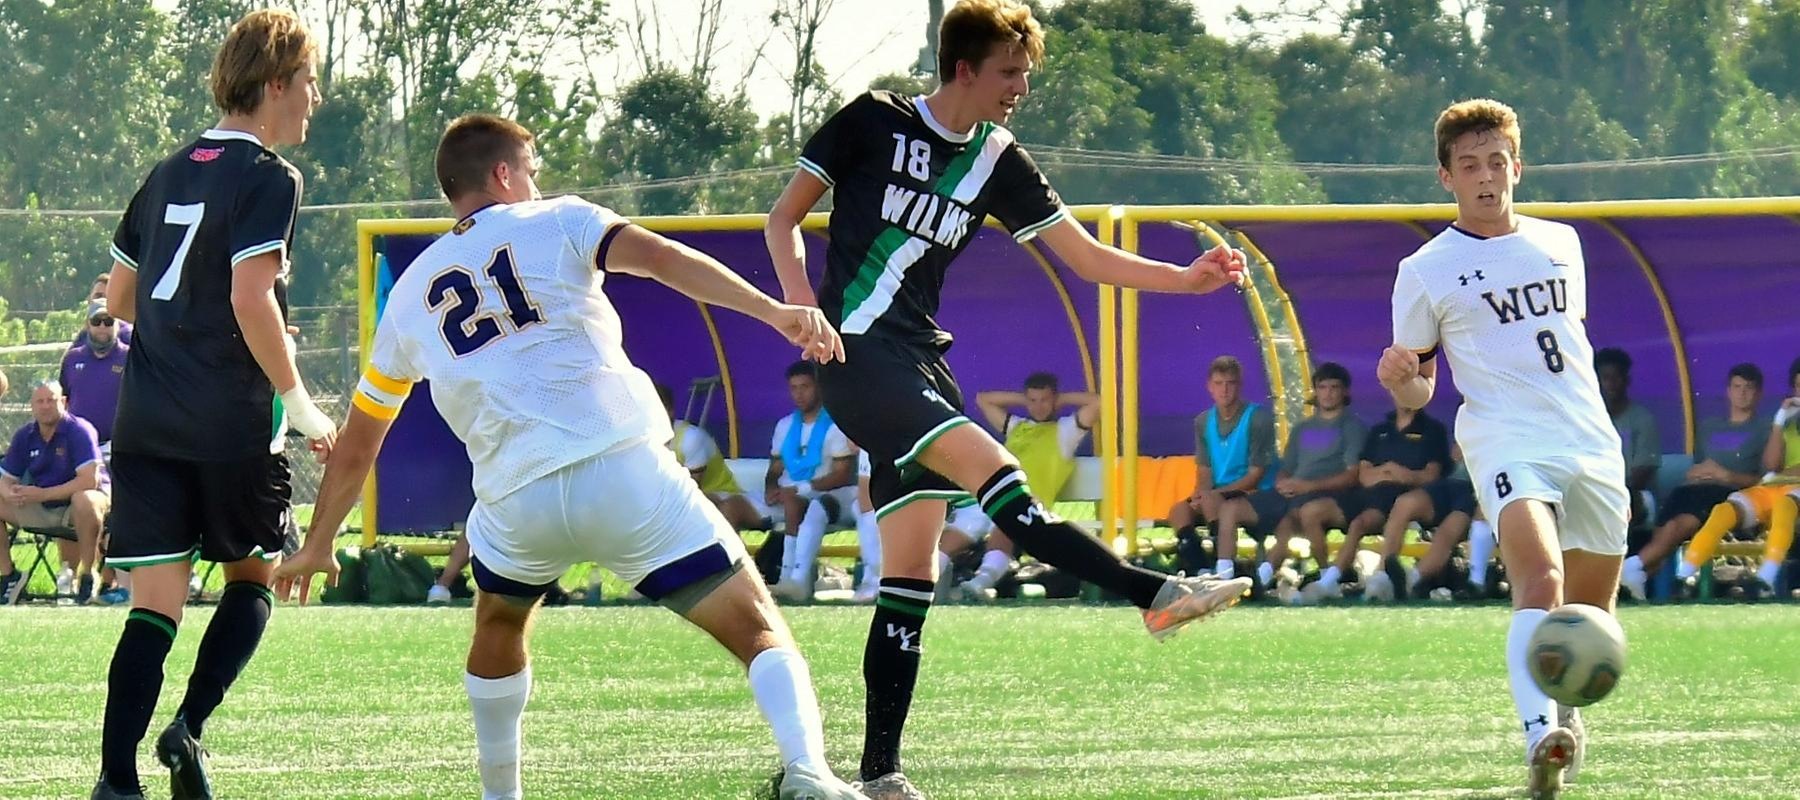 Photo of Marius Skattum Dahl scoring at West Chester. Copyright 2021; Wilmington University. All rights reserved. Photo by James Jones at West Chester. September 8, 2021.